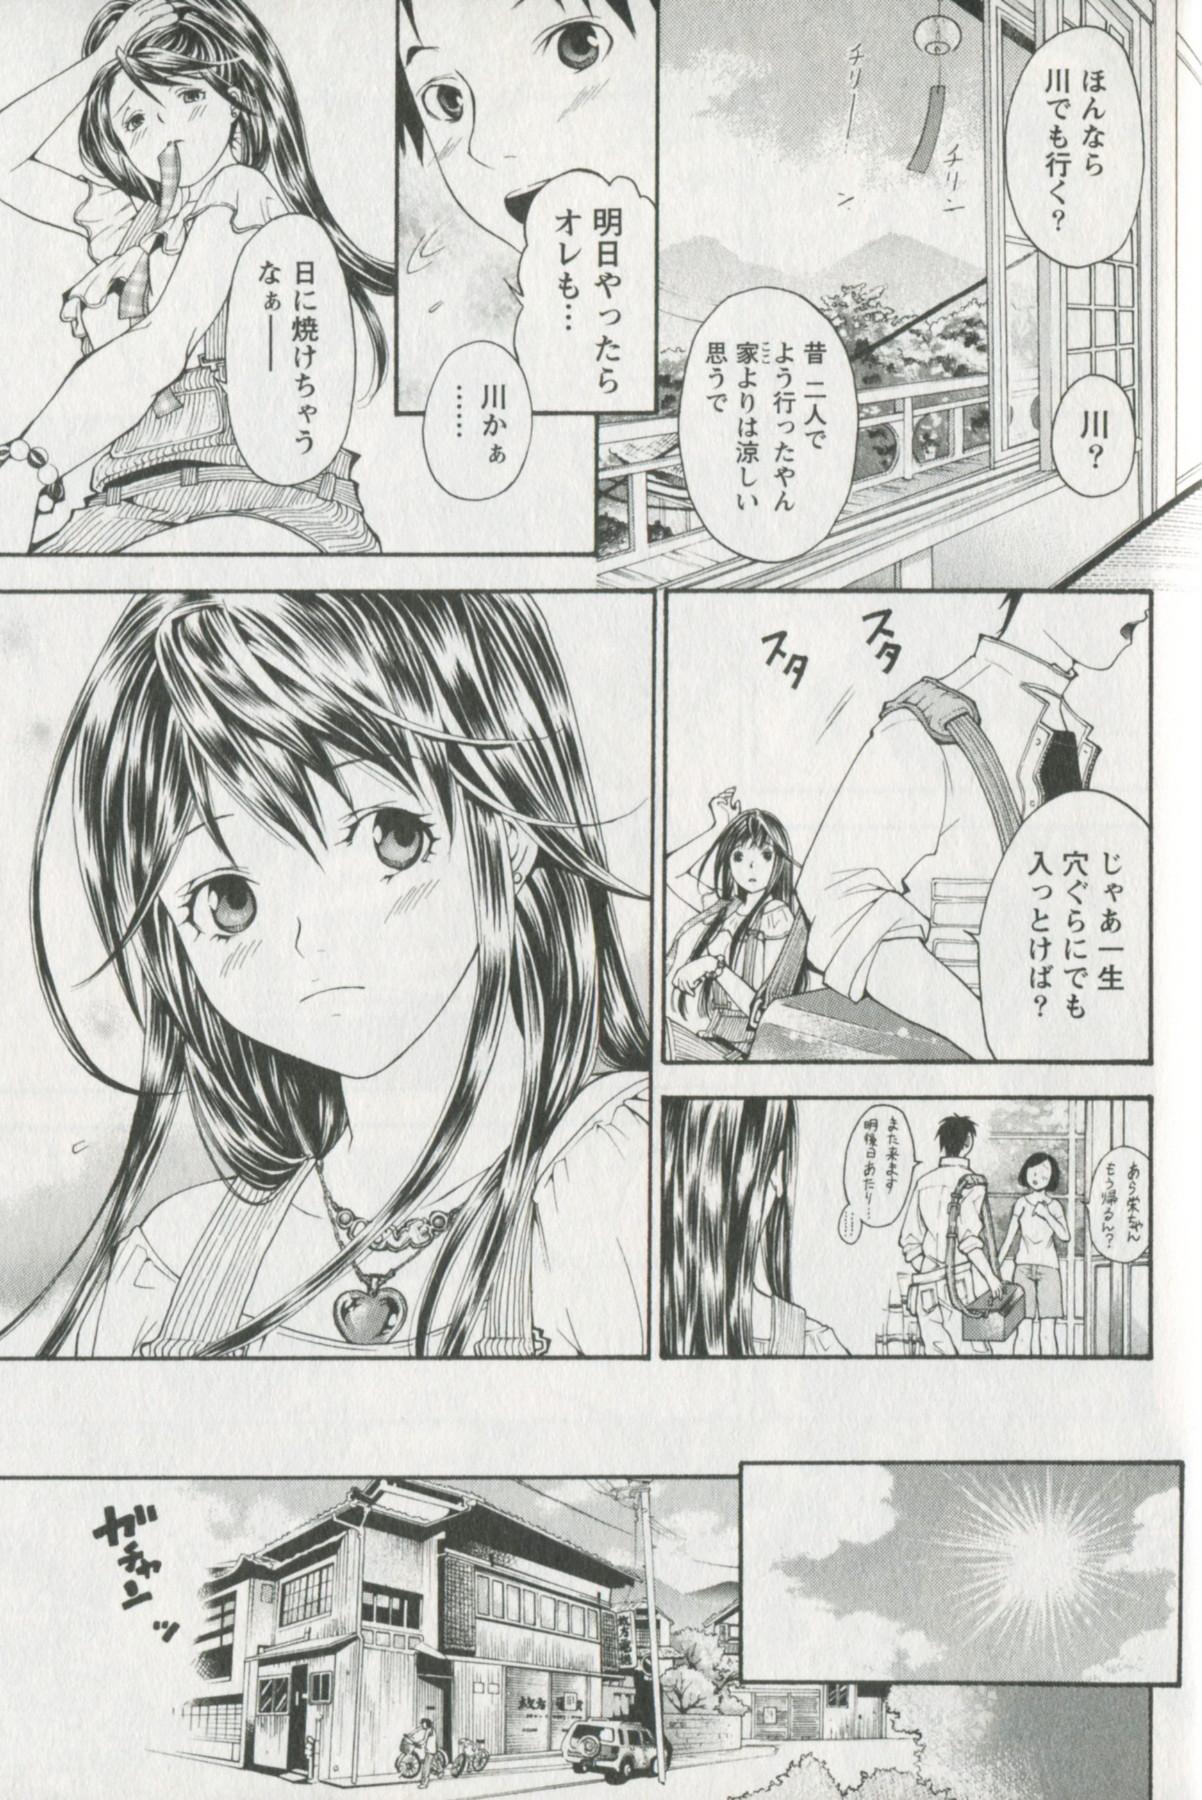 Jisho to Skirt - She Put Down the Dictionary, then Took off her Skirt. 176